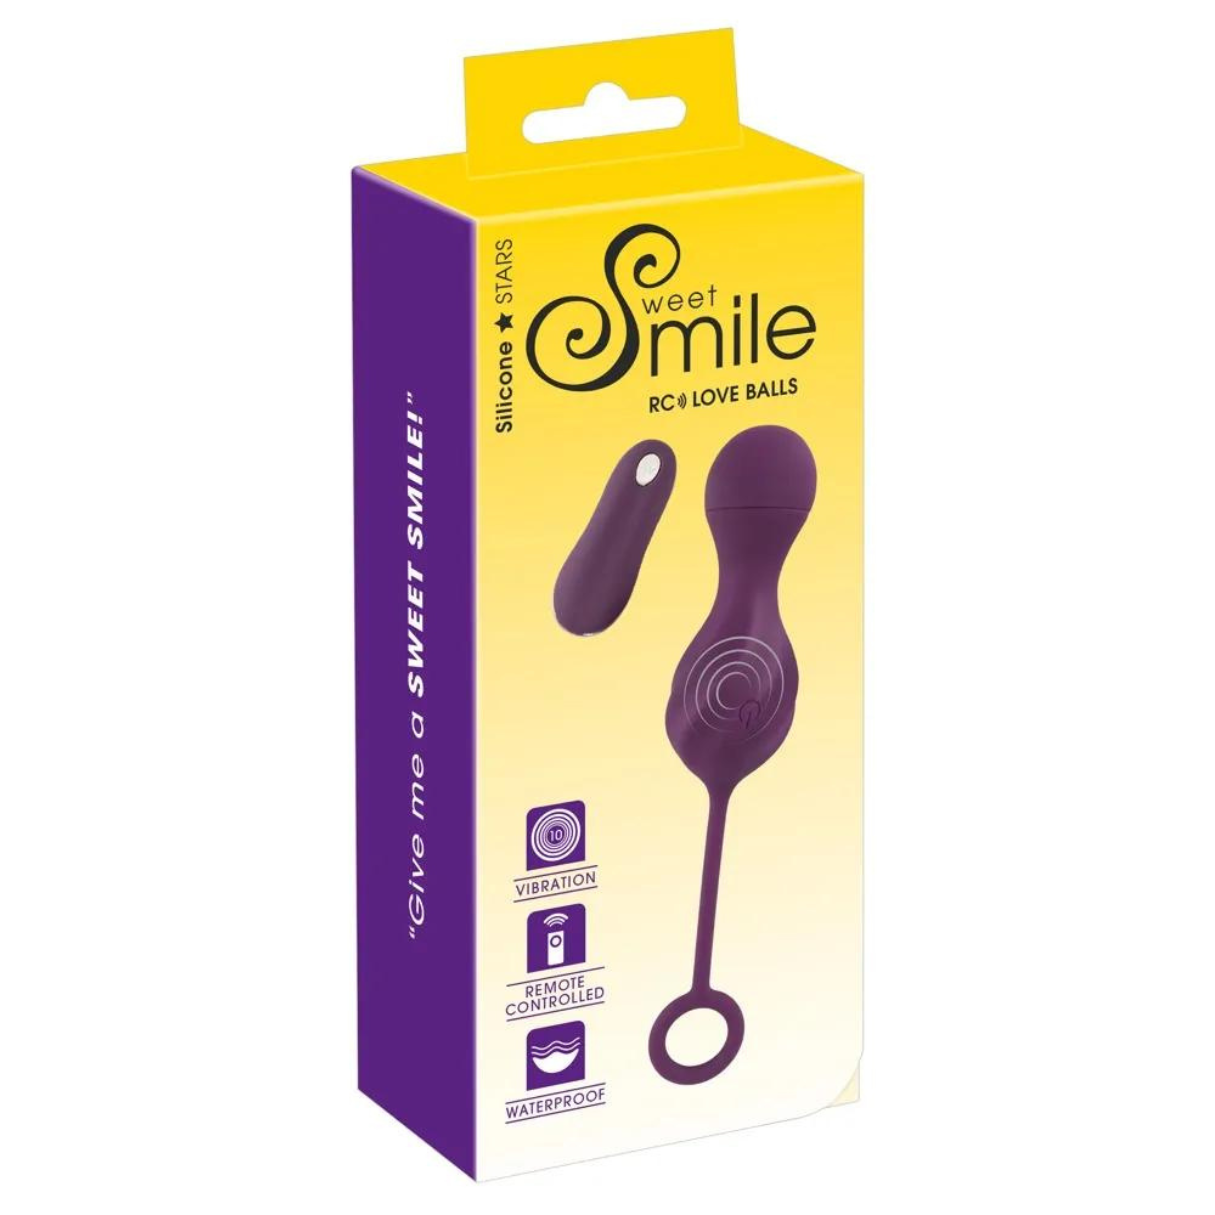 SWEET SMILE Remote Balls Vibrator Controlled Love